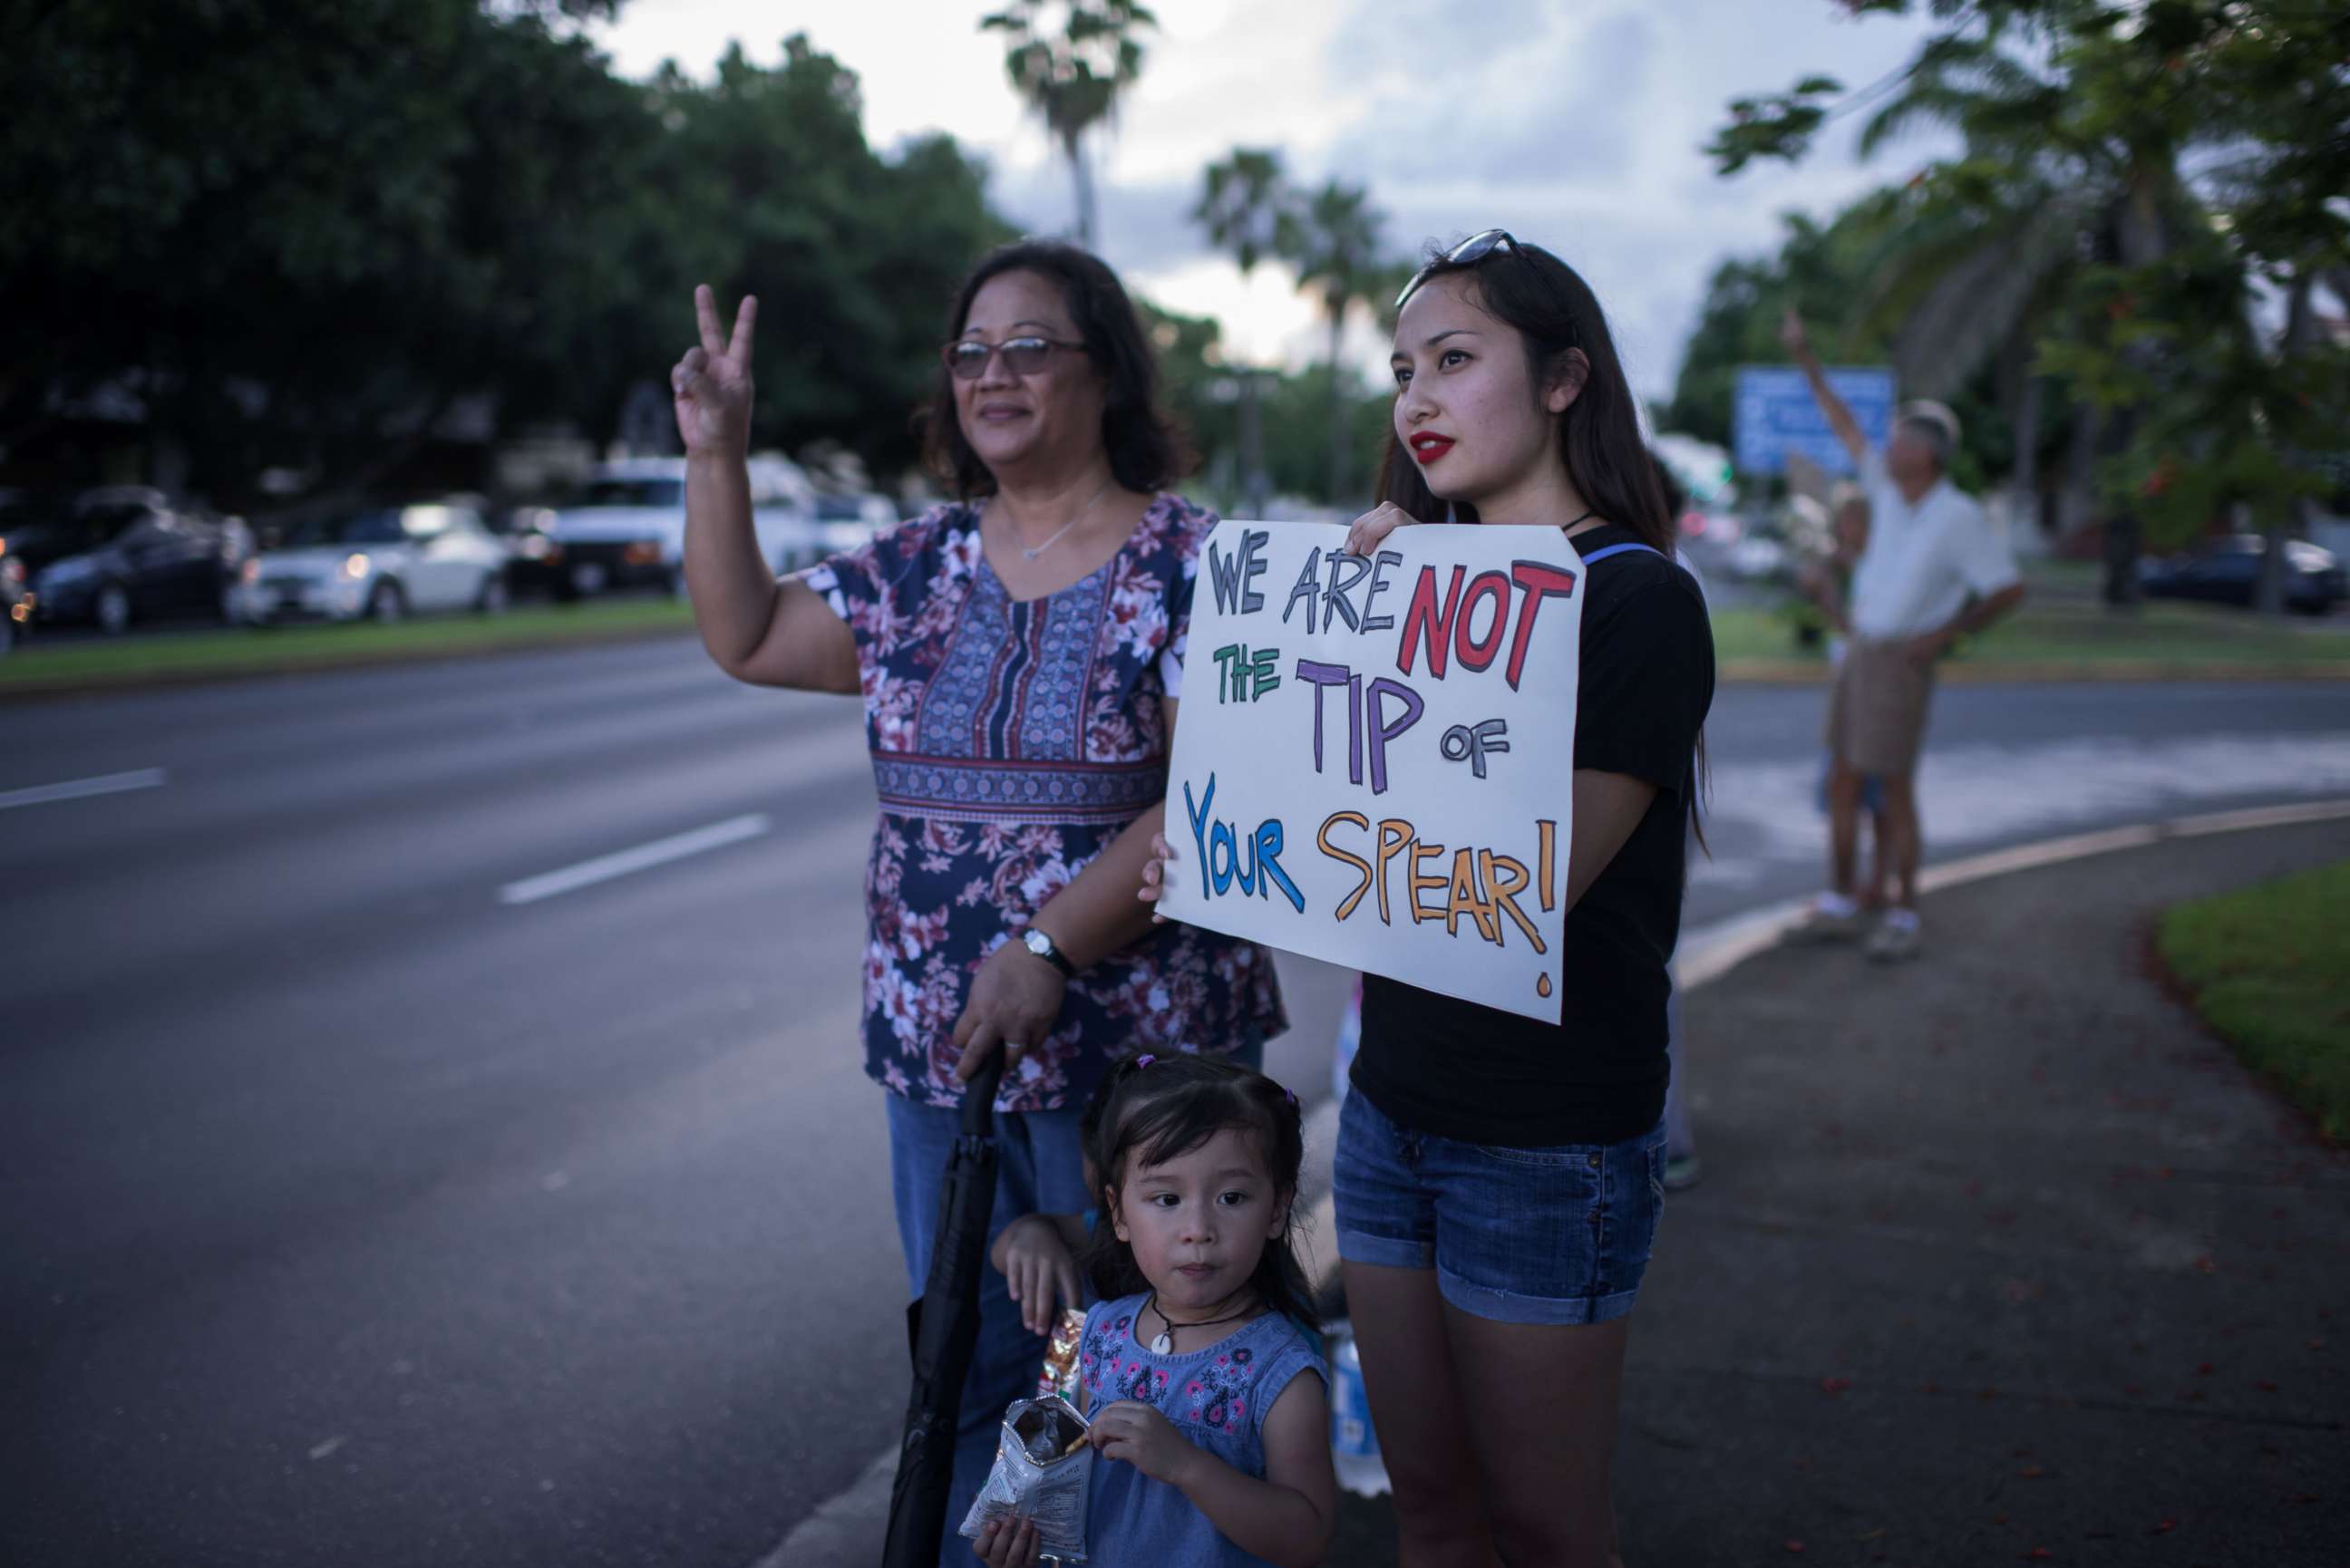 PHOTO: Members of community groups calling for the "de-colonization and de-militarization of Guam" attend a "People for Peace" rally in Hagatna, Guam, Aug. 14, 2017.
